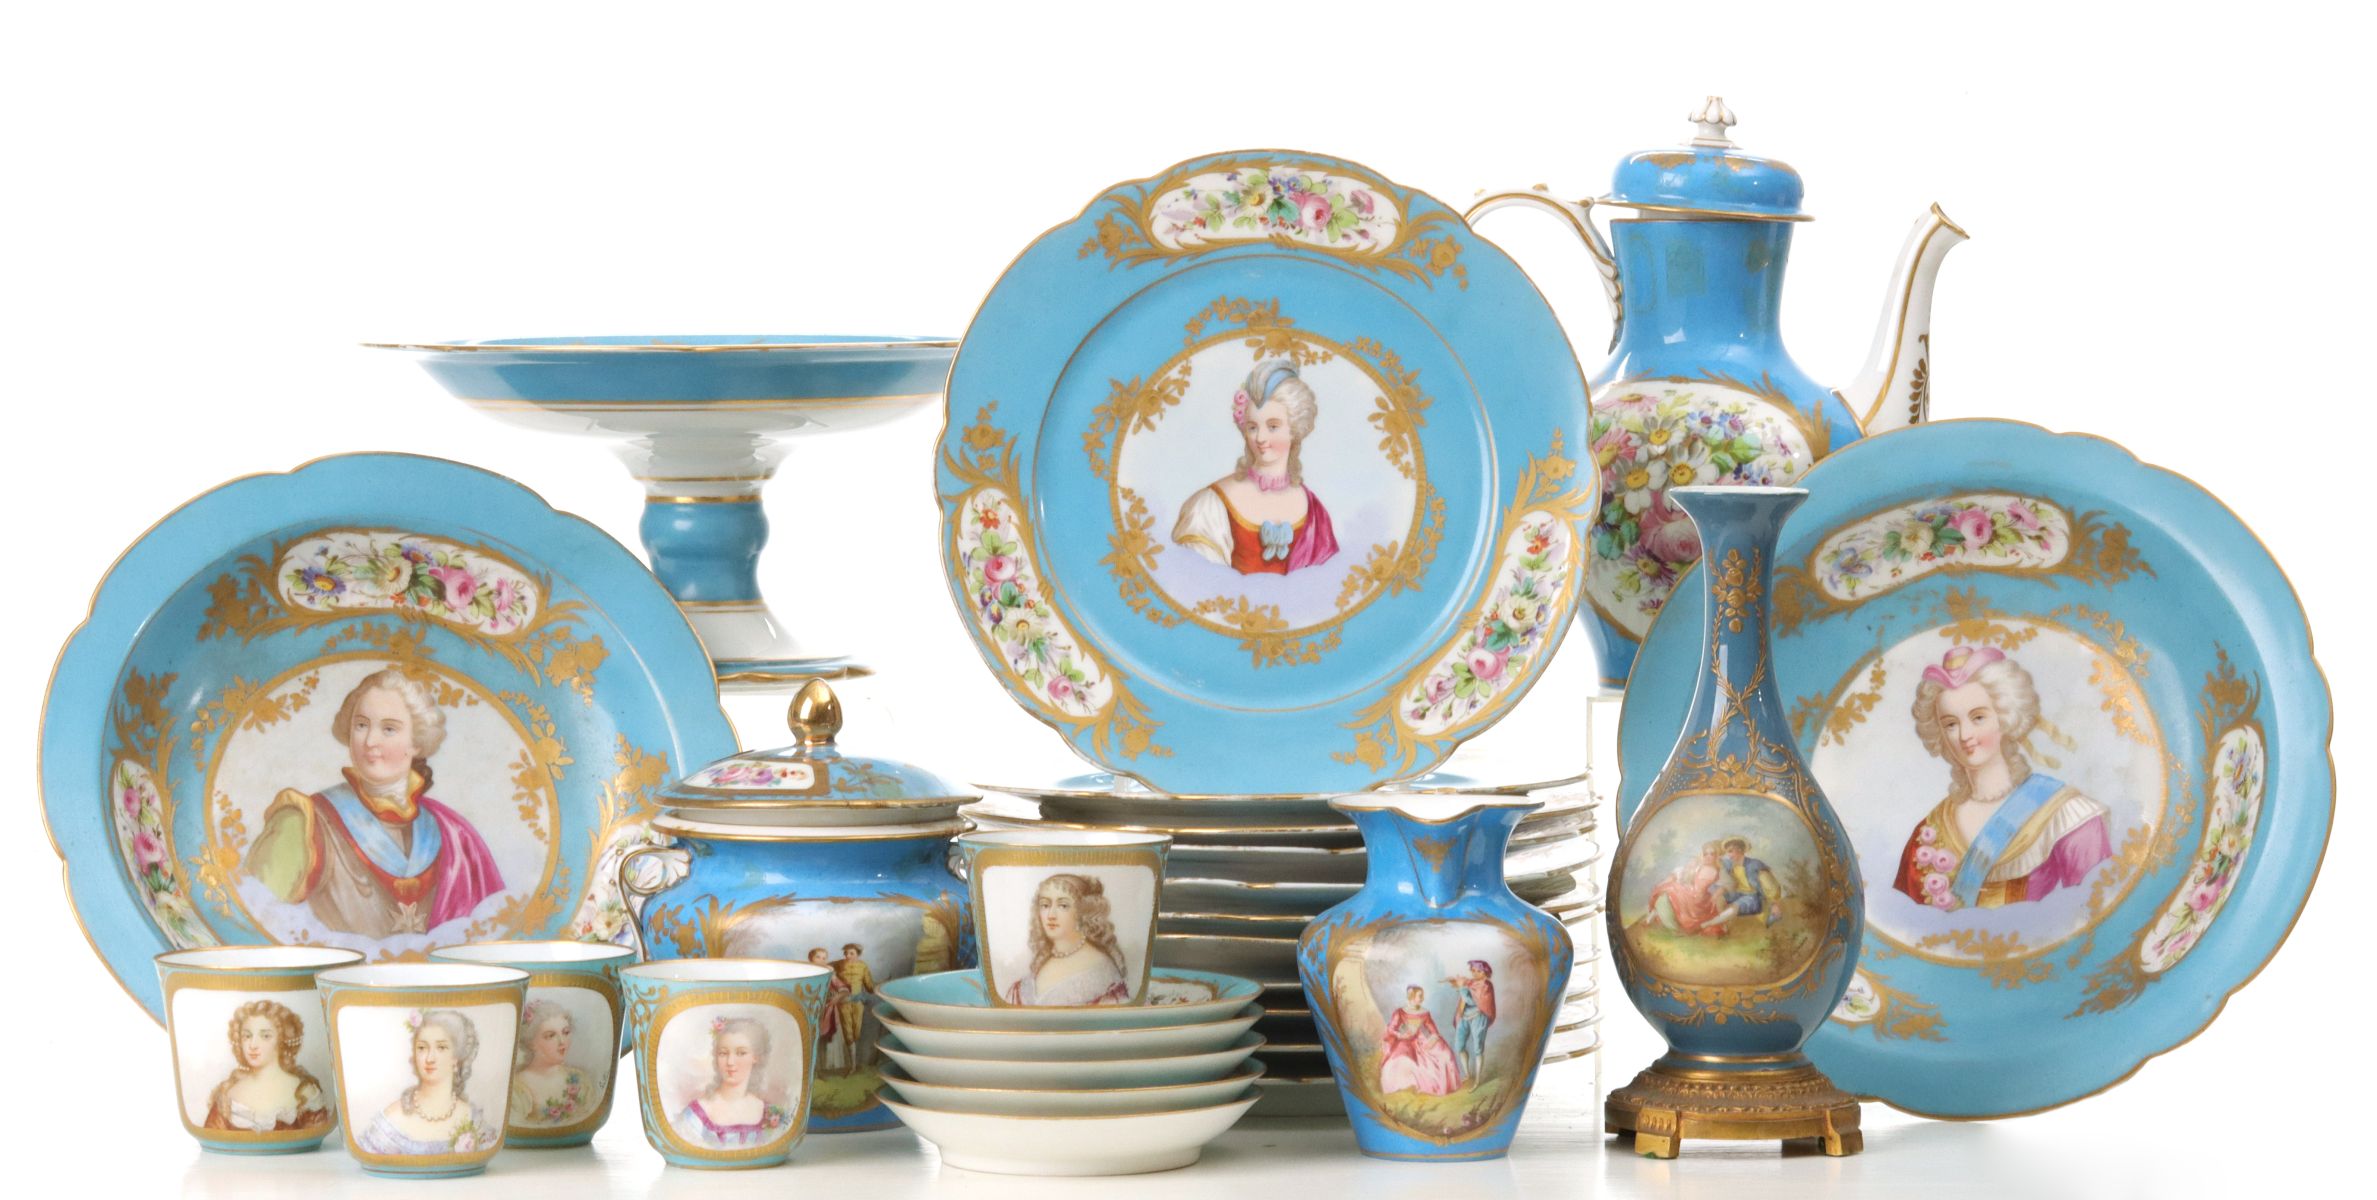 ASSEMBLED SERVICE OF SERVES AND SEVRES STYLE PORCELAIN